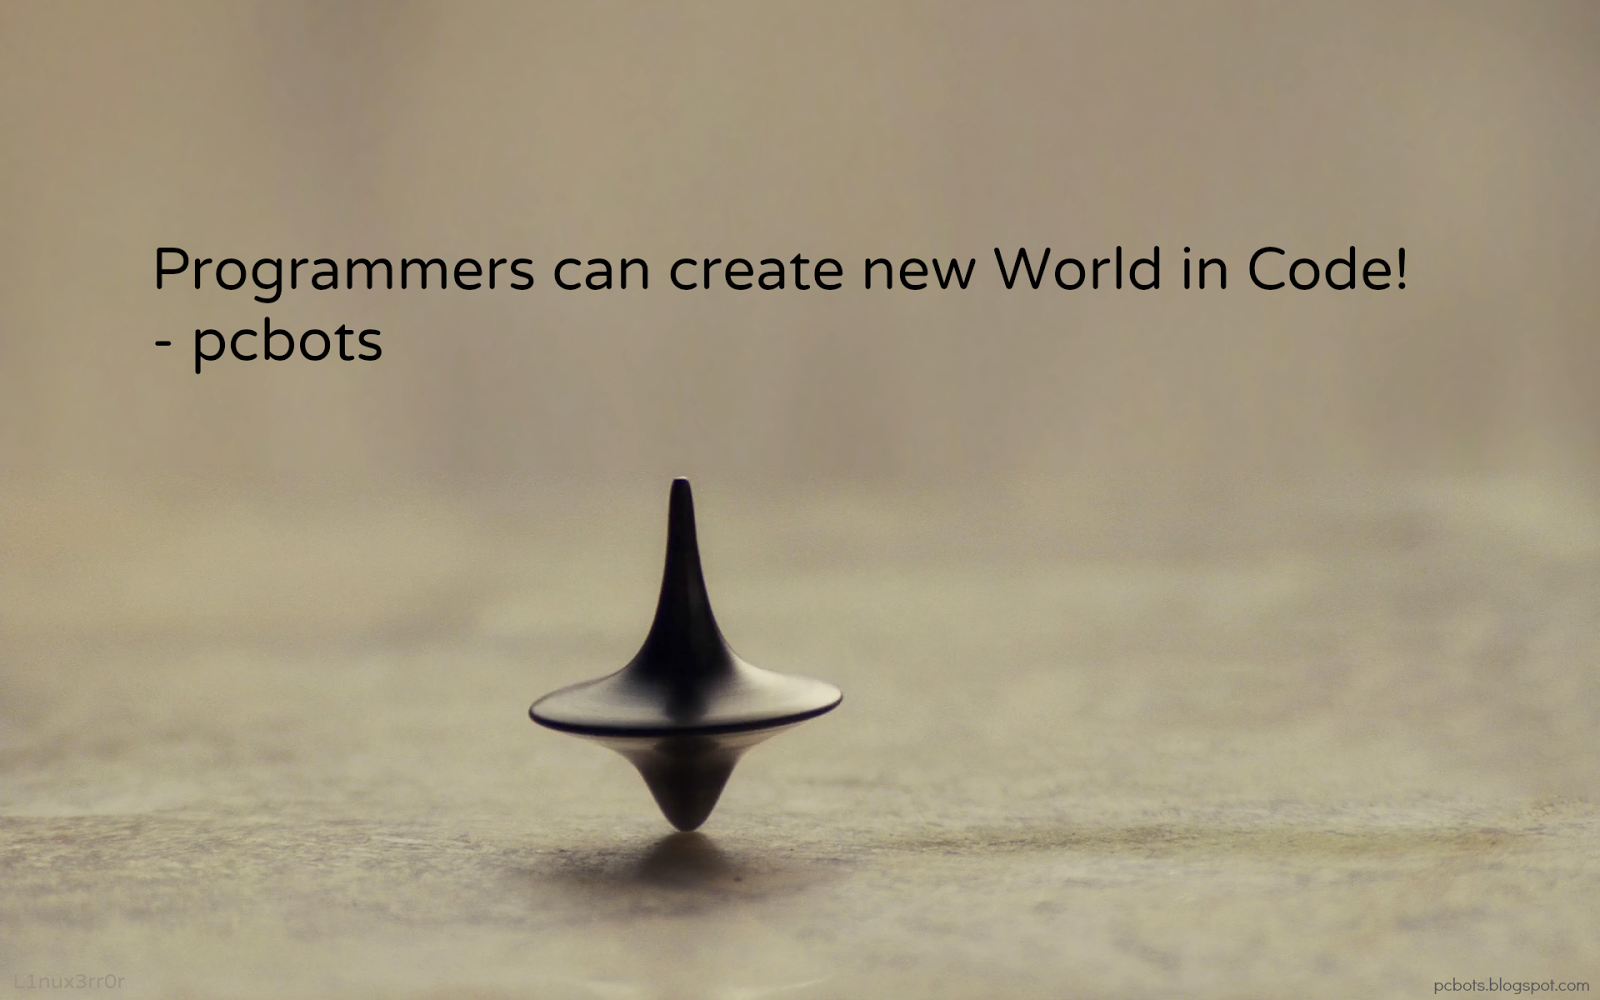 Programmers can create new world in code HD Programmers Wallpaper